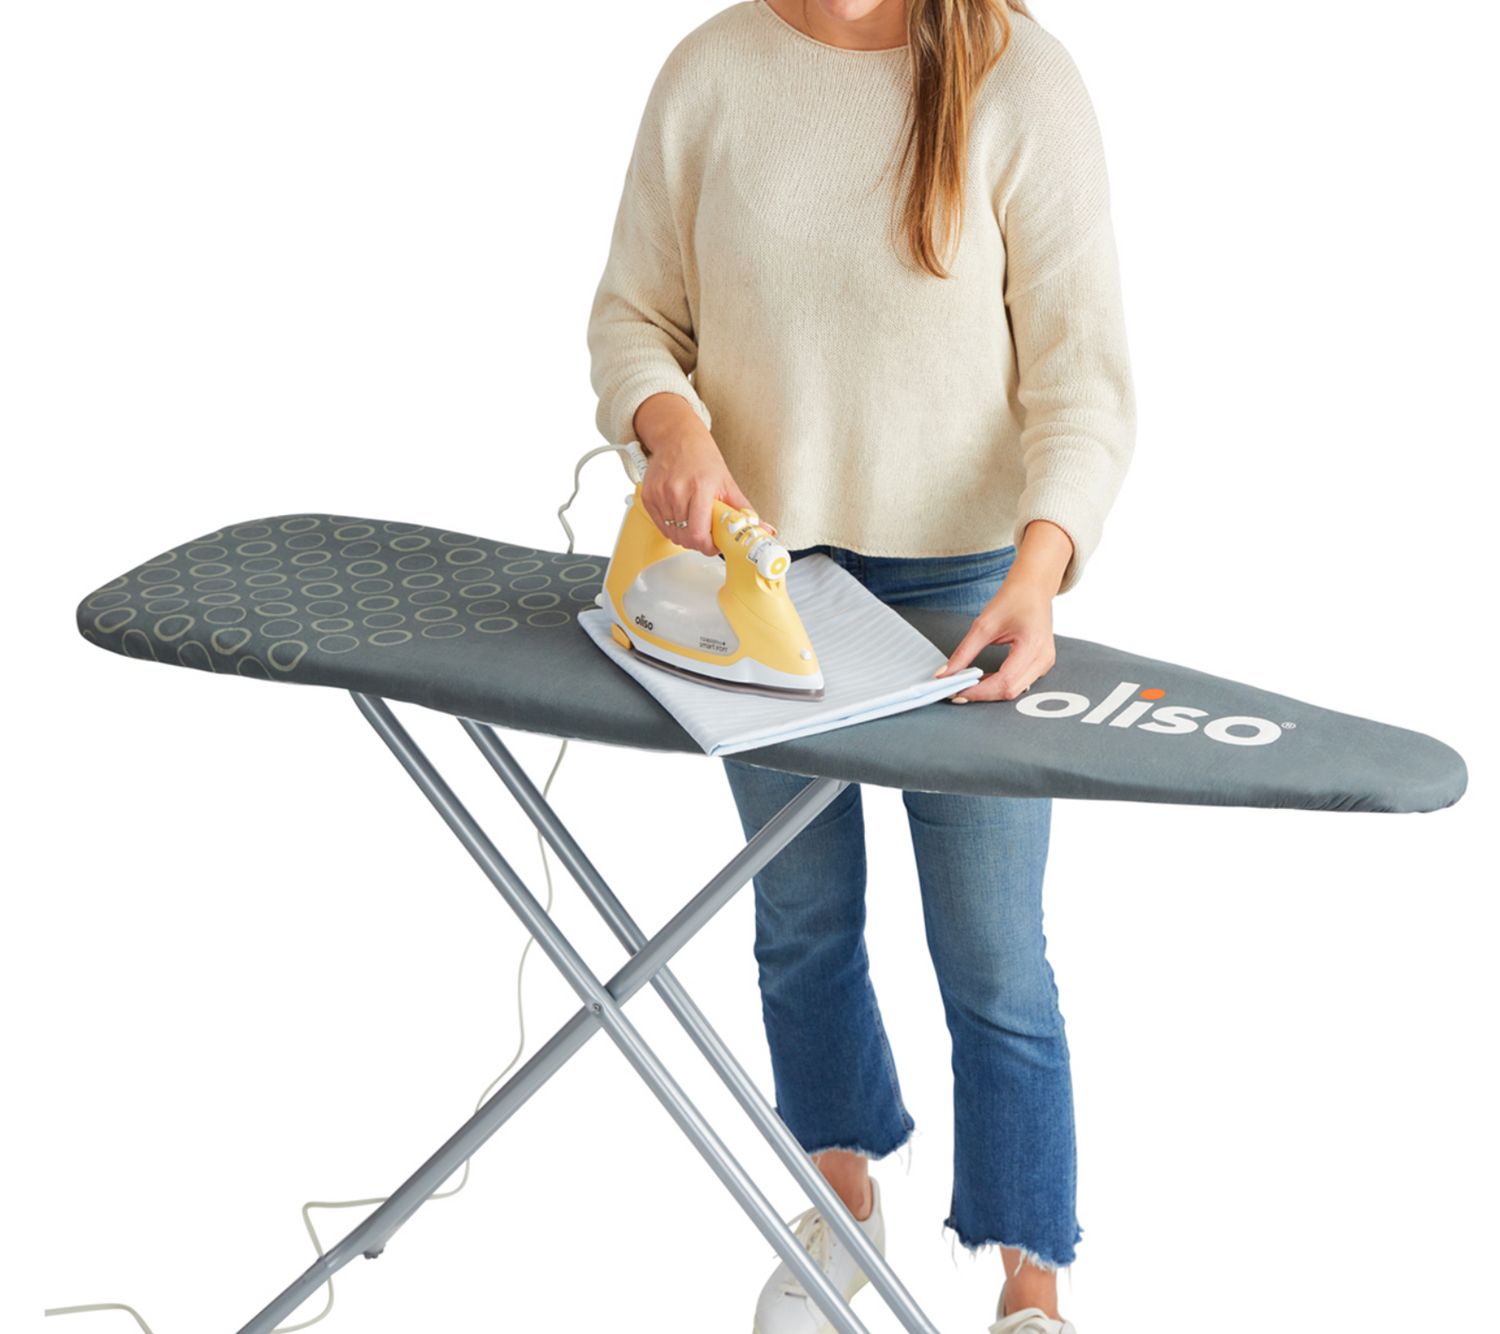 Clothes being ironed on a grey Oliso ironing board cover 